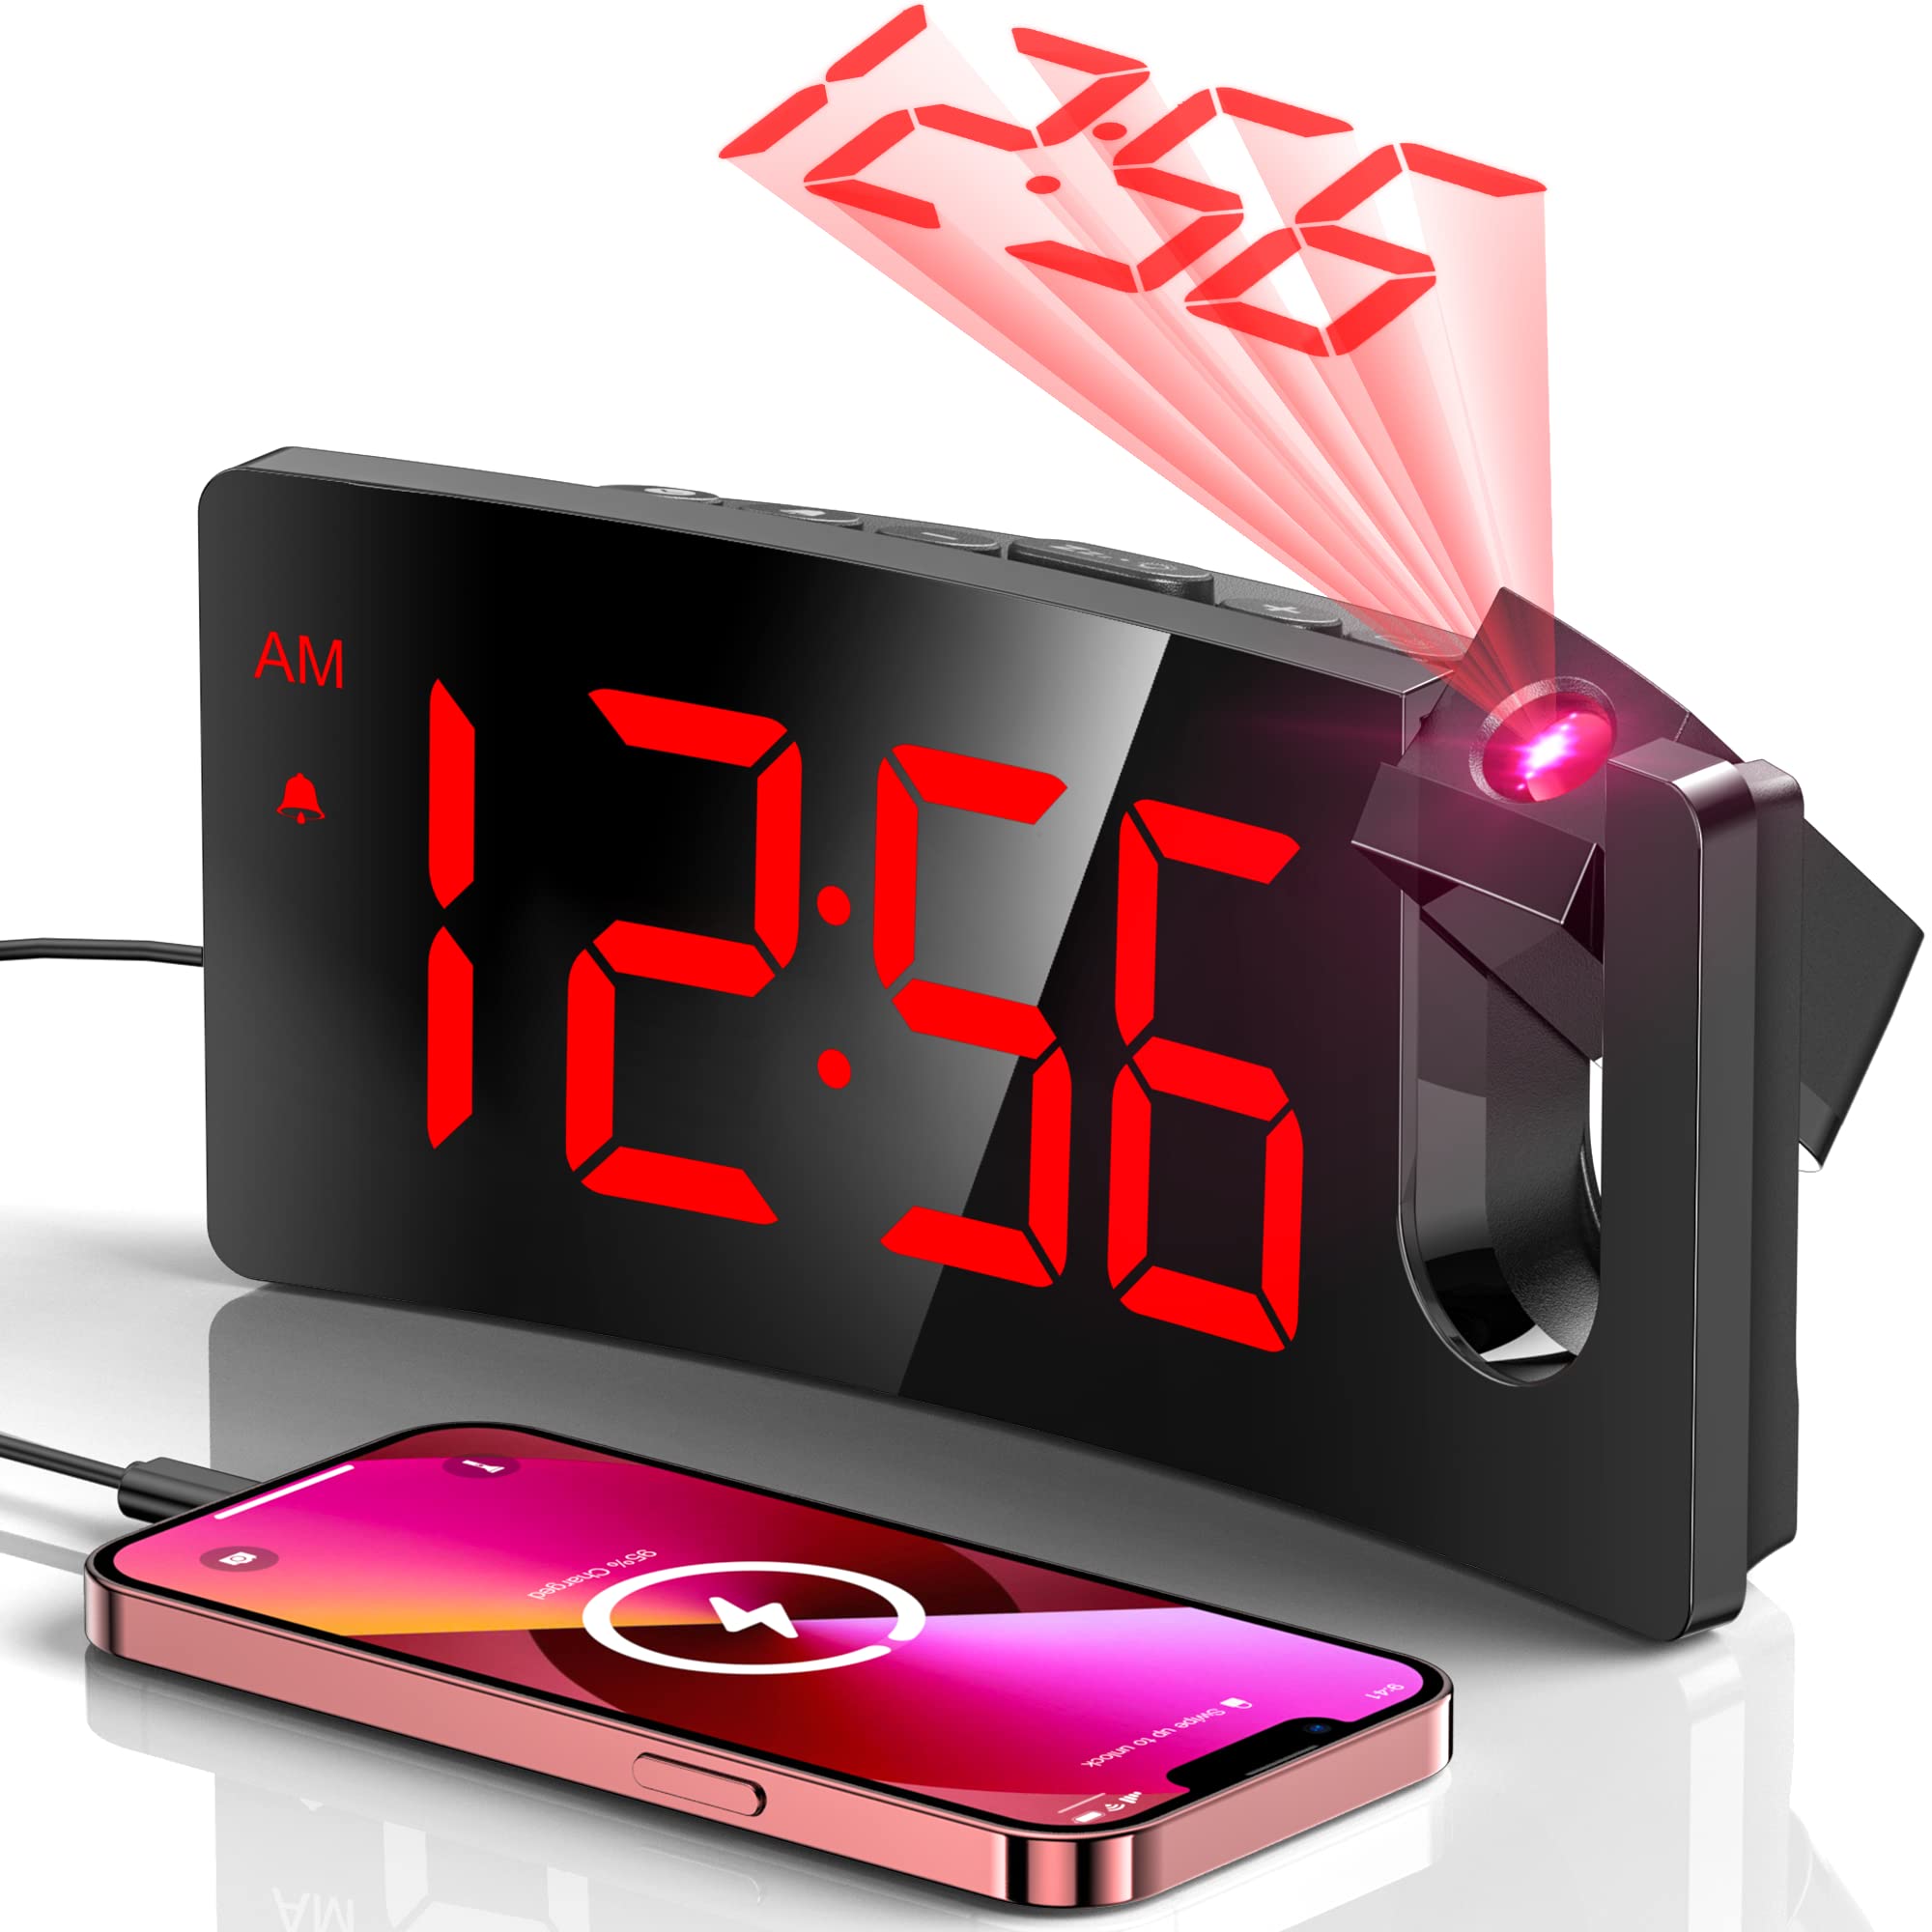 Where Can I Buy A Projection Alarm Clock